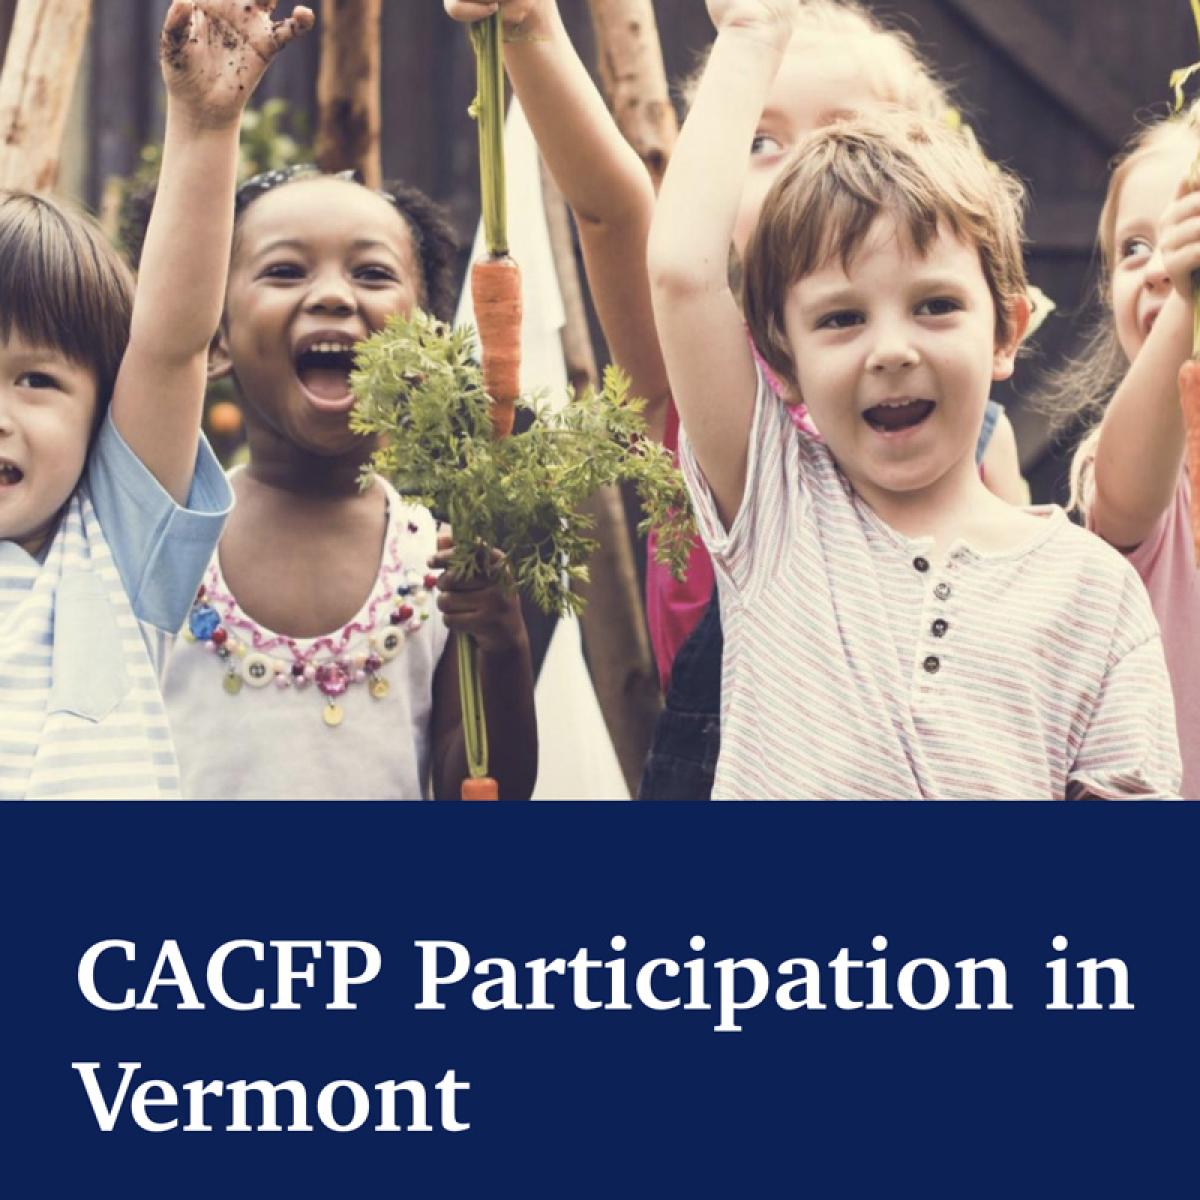 CACFP Participation in Vermont